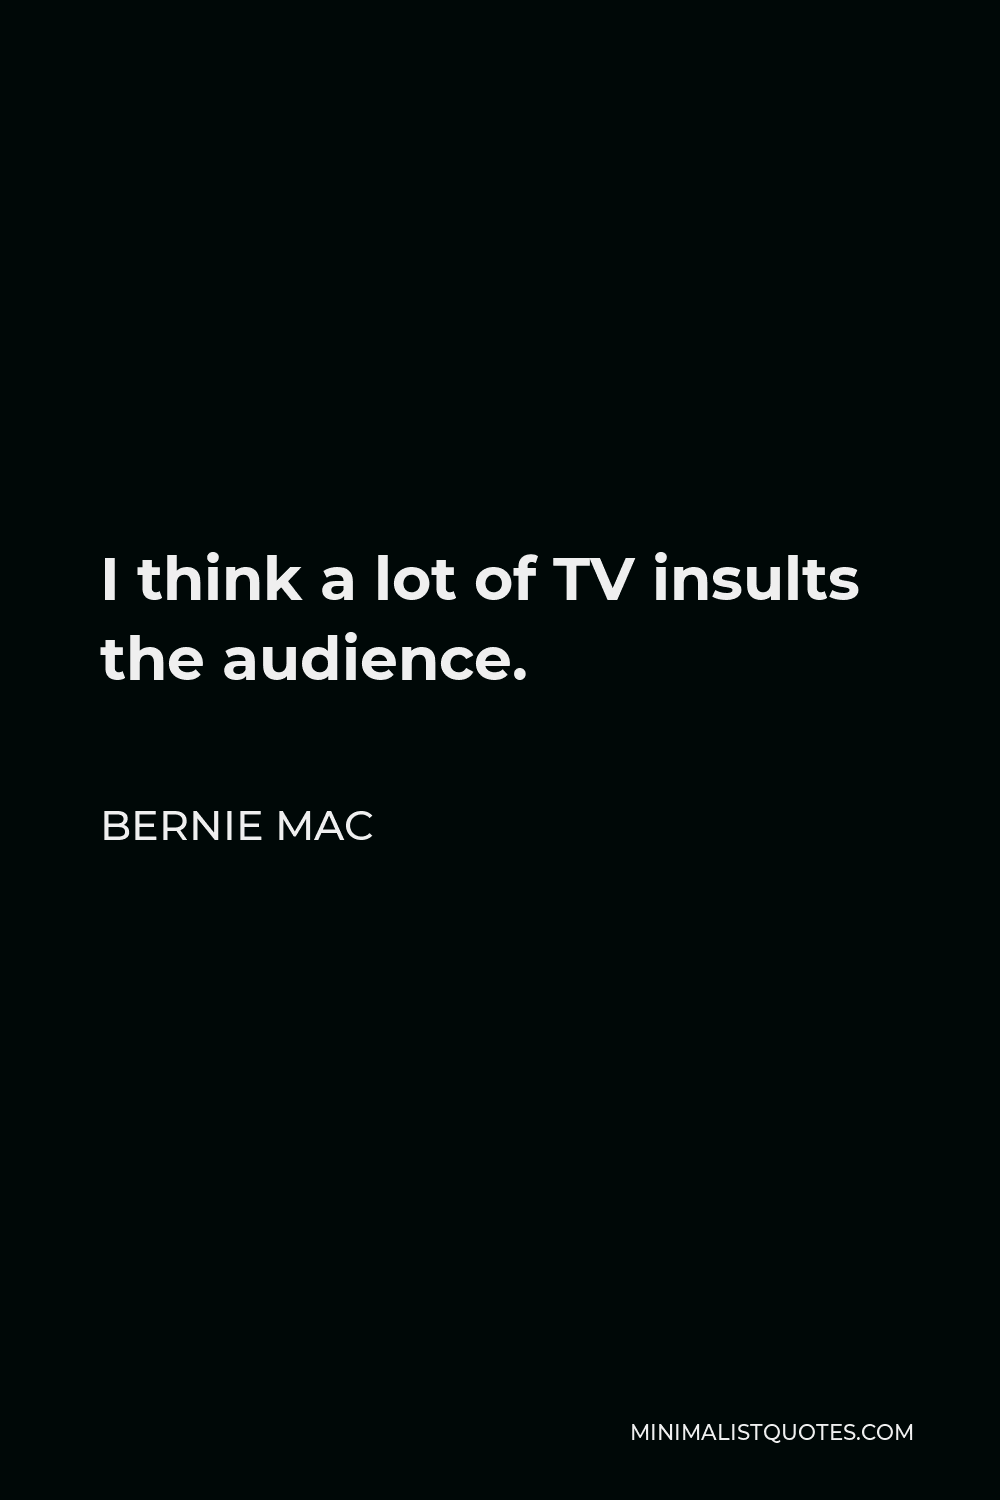 Bernie Mac Quote - I think a lot of TV insults the audience.